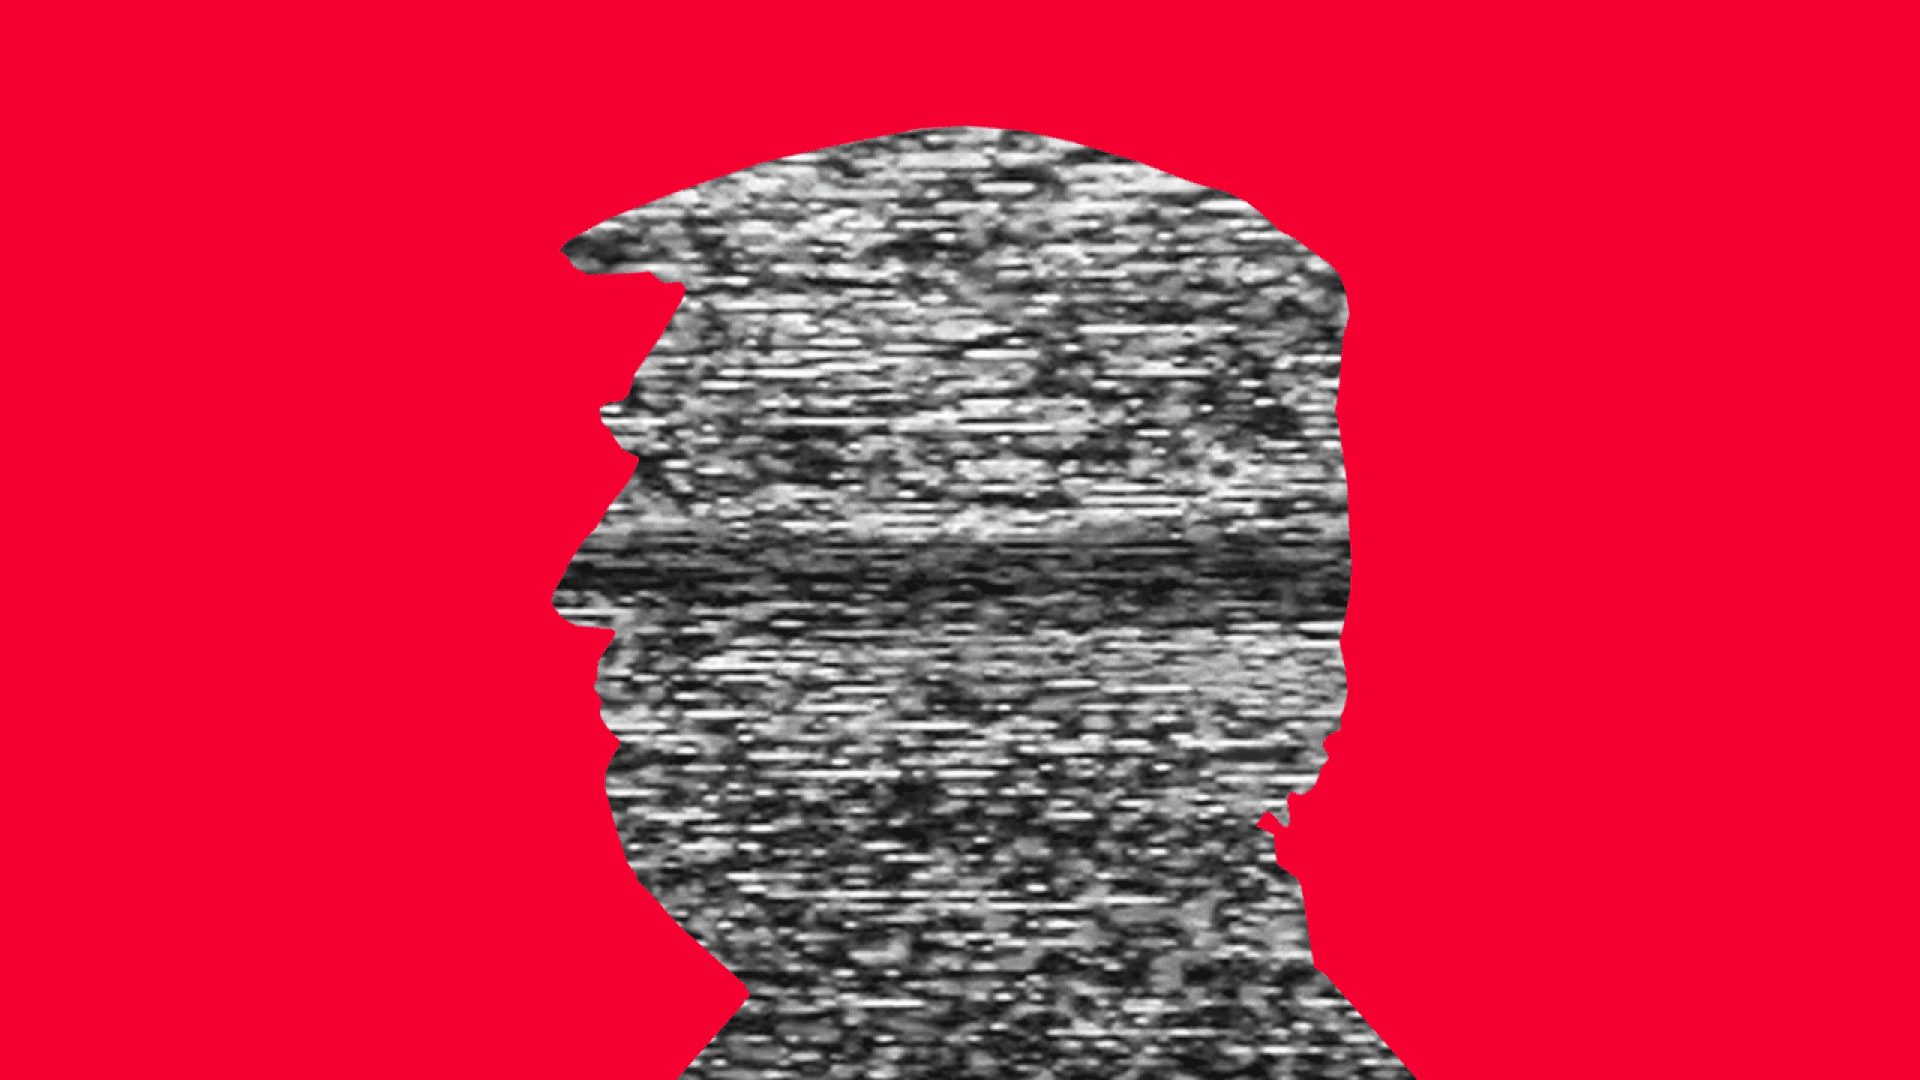 Animated illustration of Trump's silhouette filled with television static